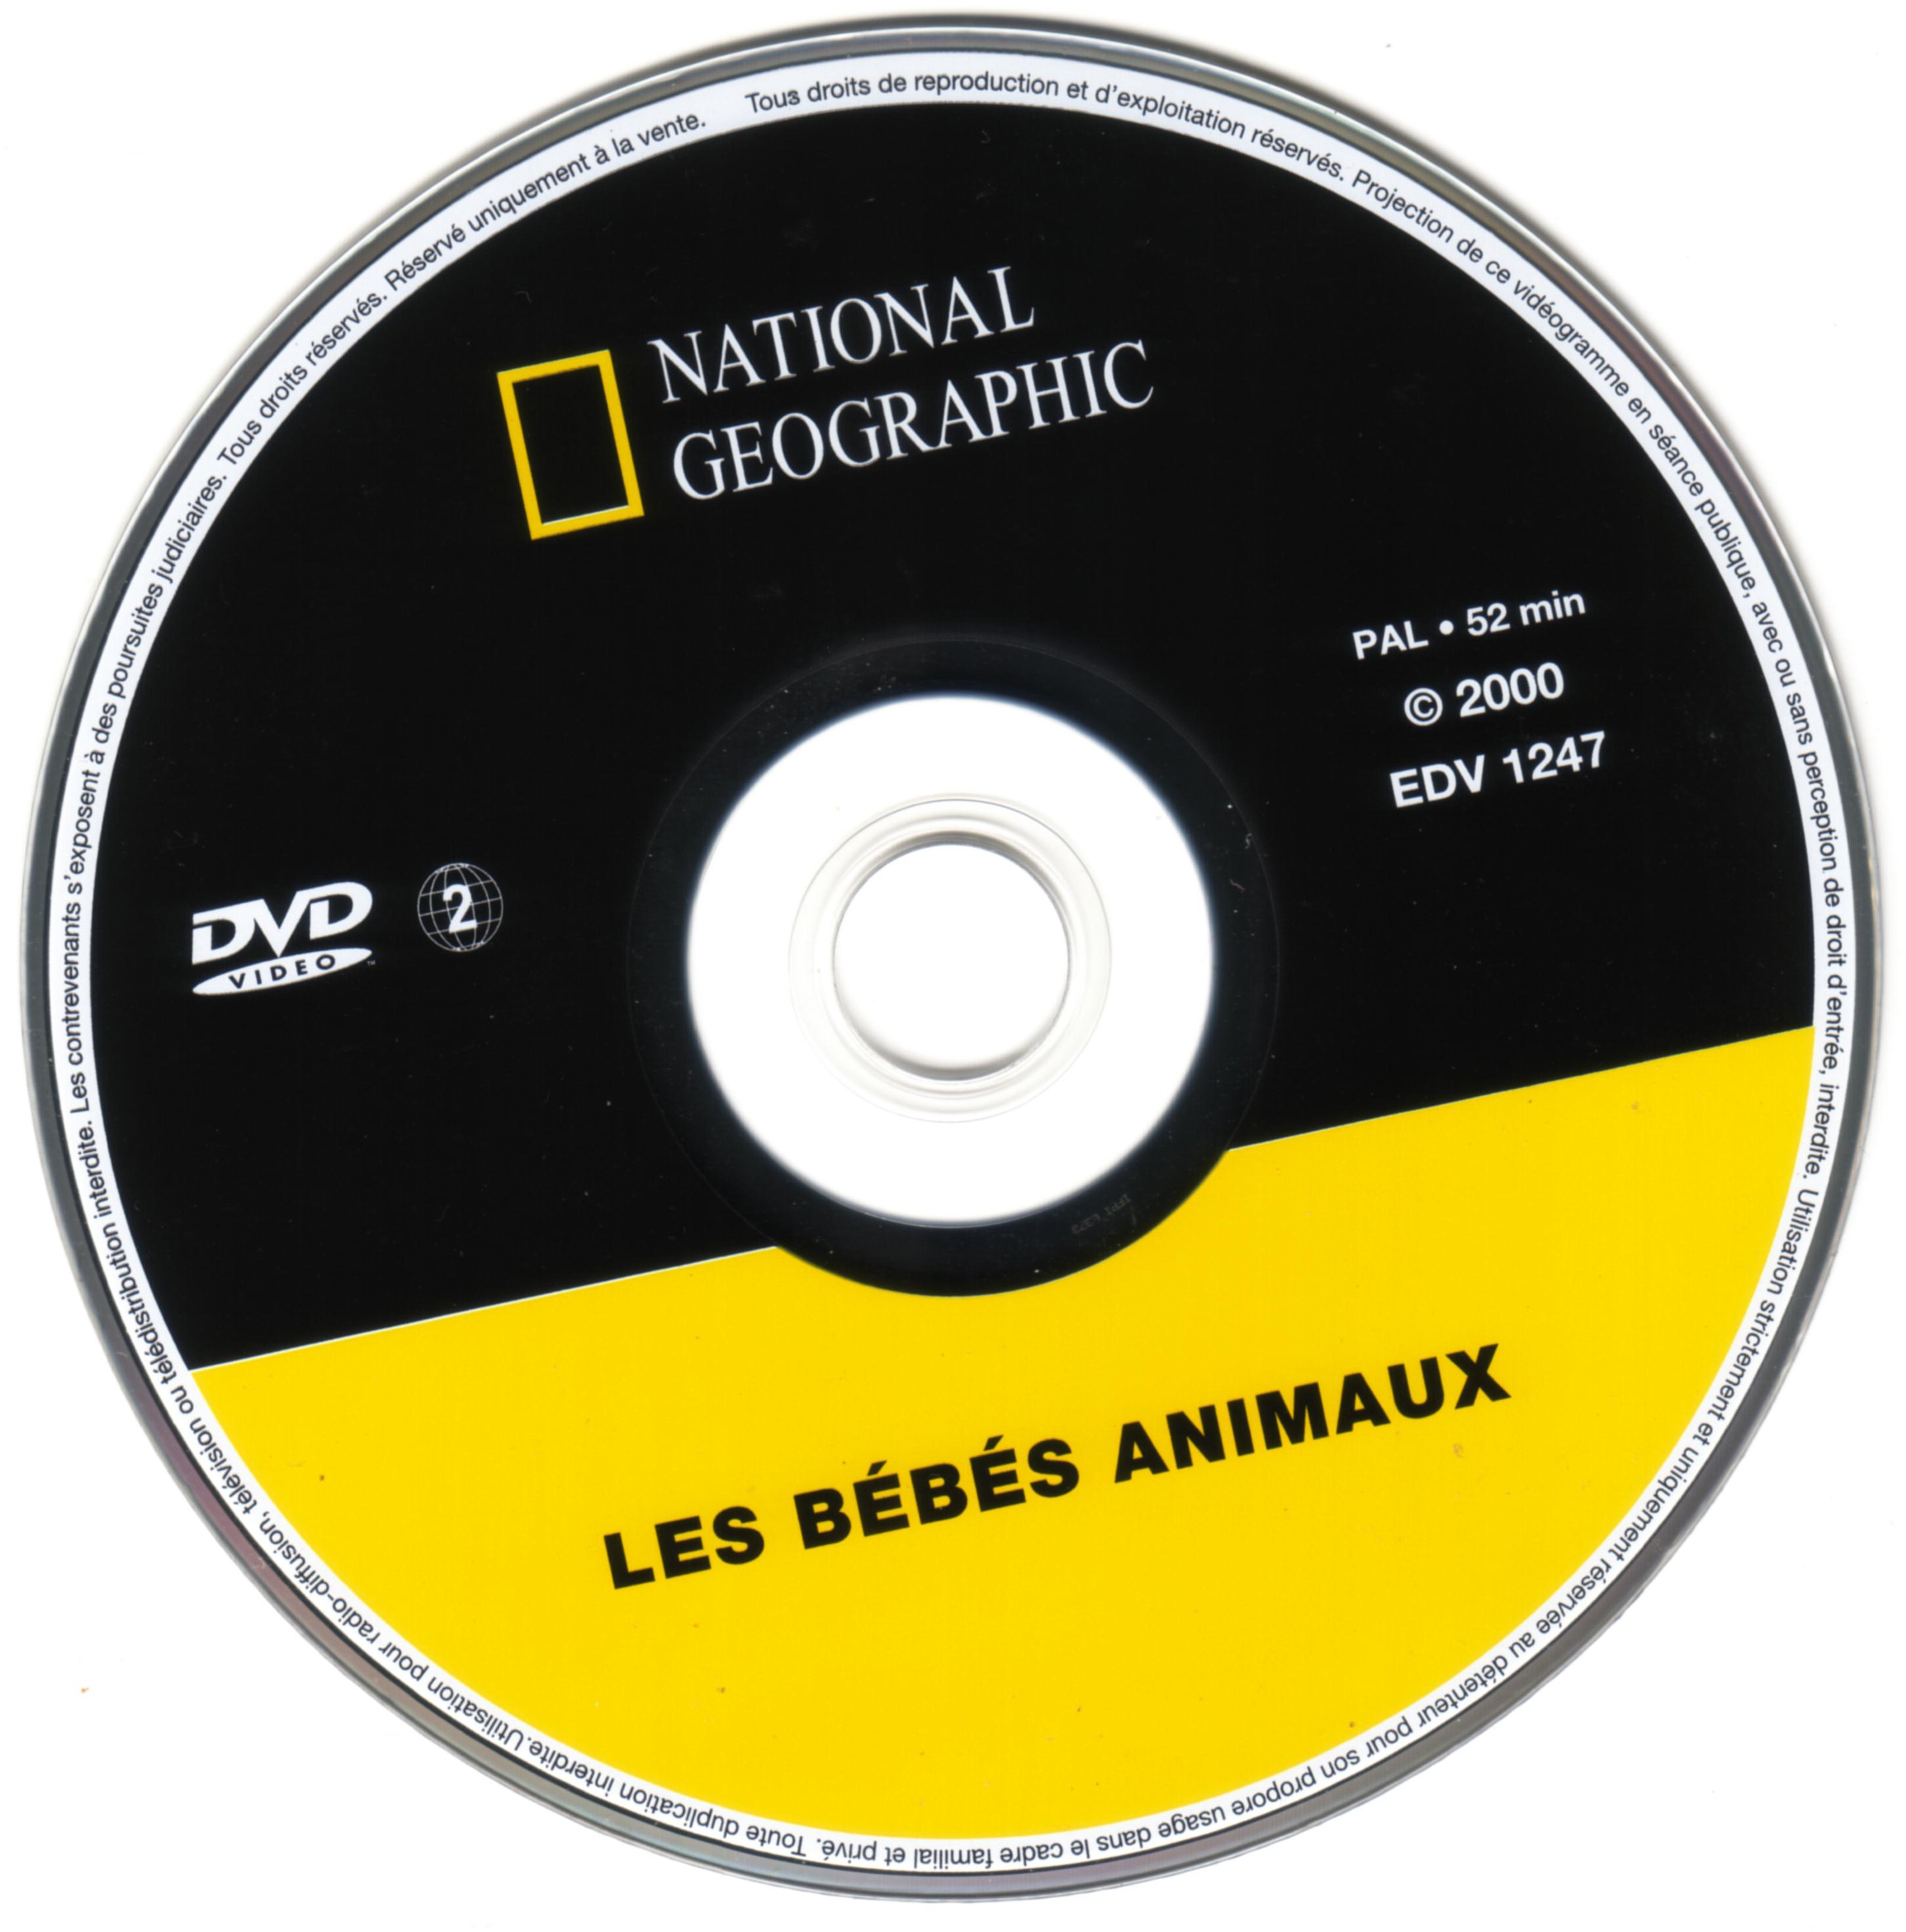 National Geographic - Les bbs animeaux